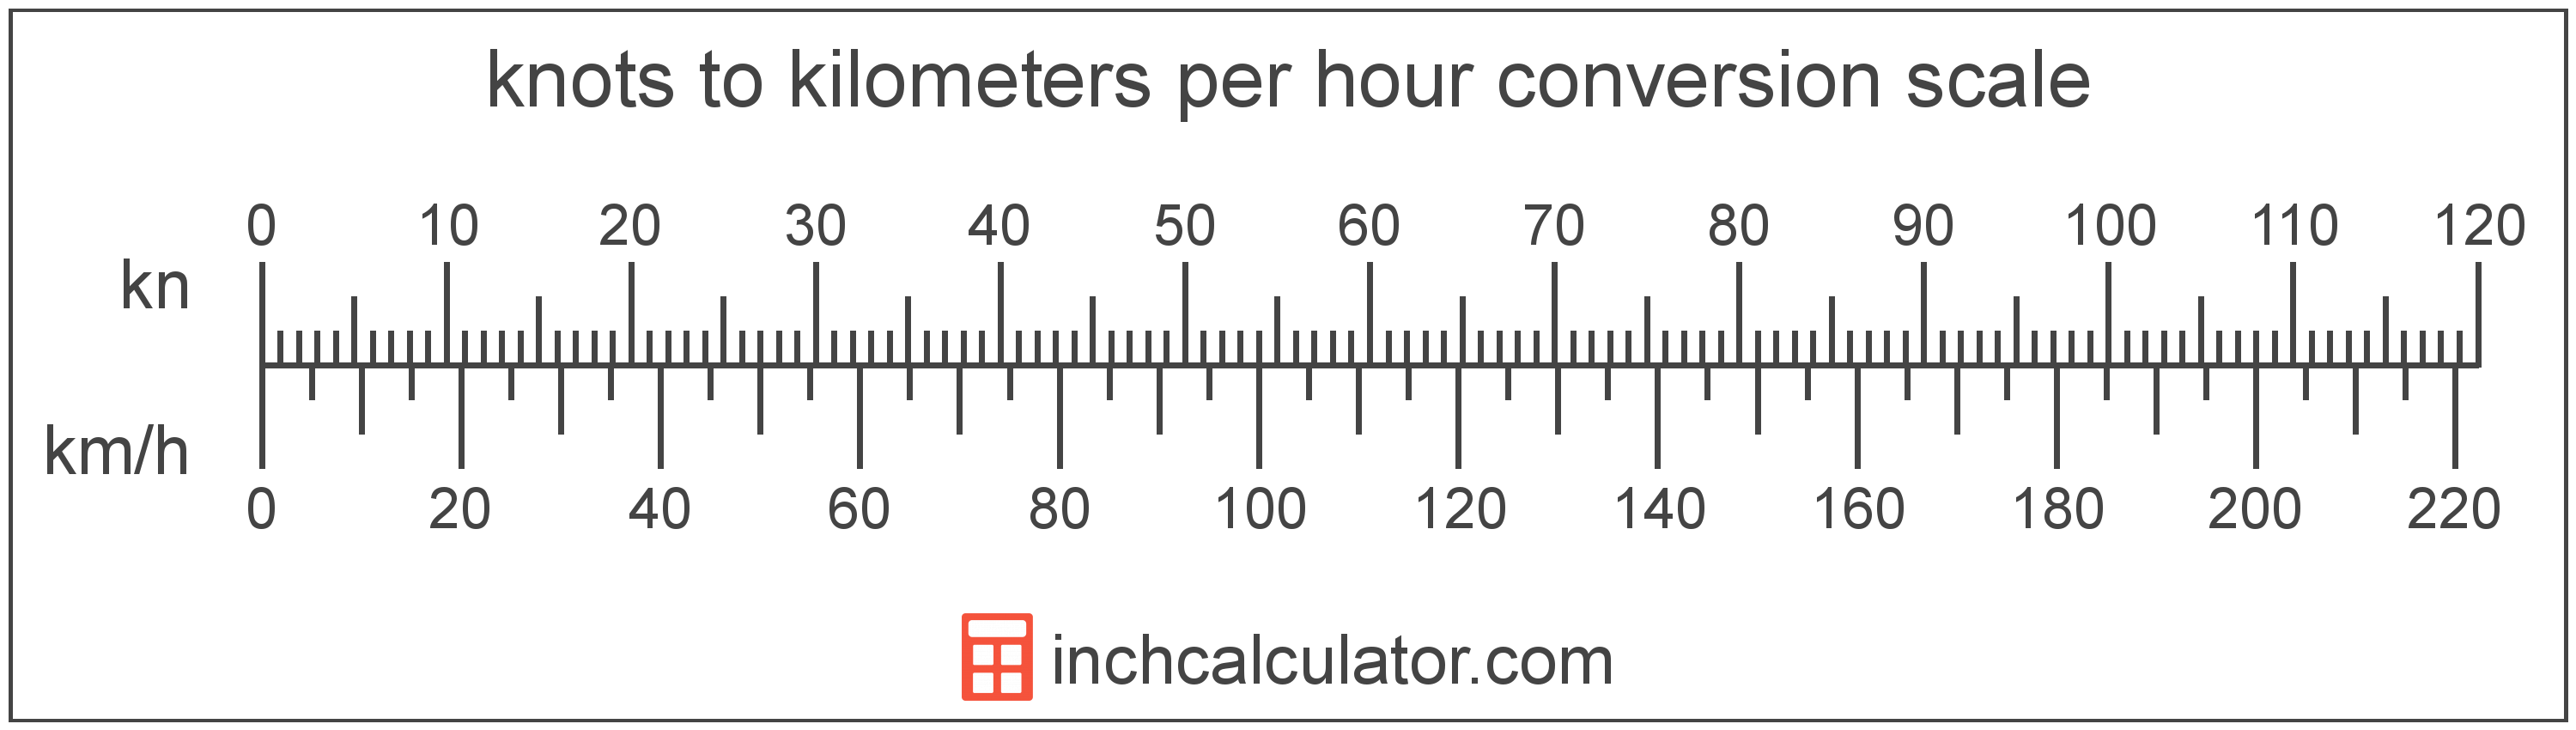 conversion scale showing knots and equivalent kilometers per hour speed values